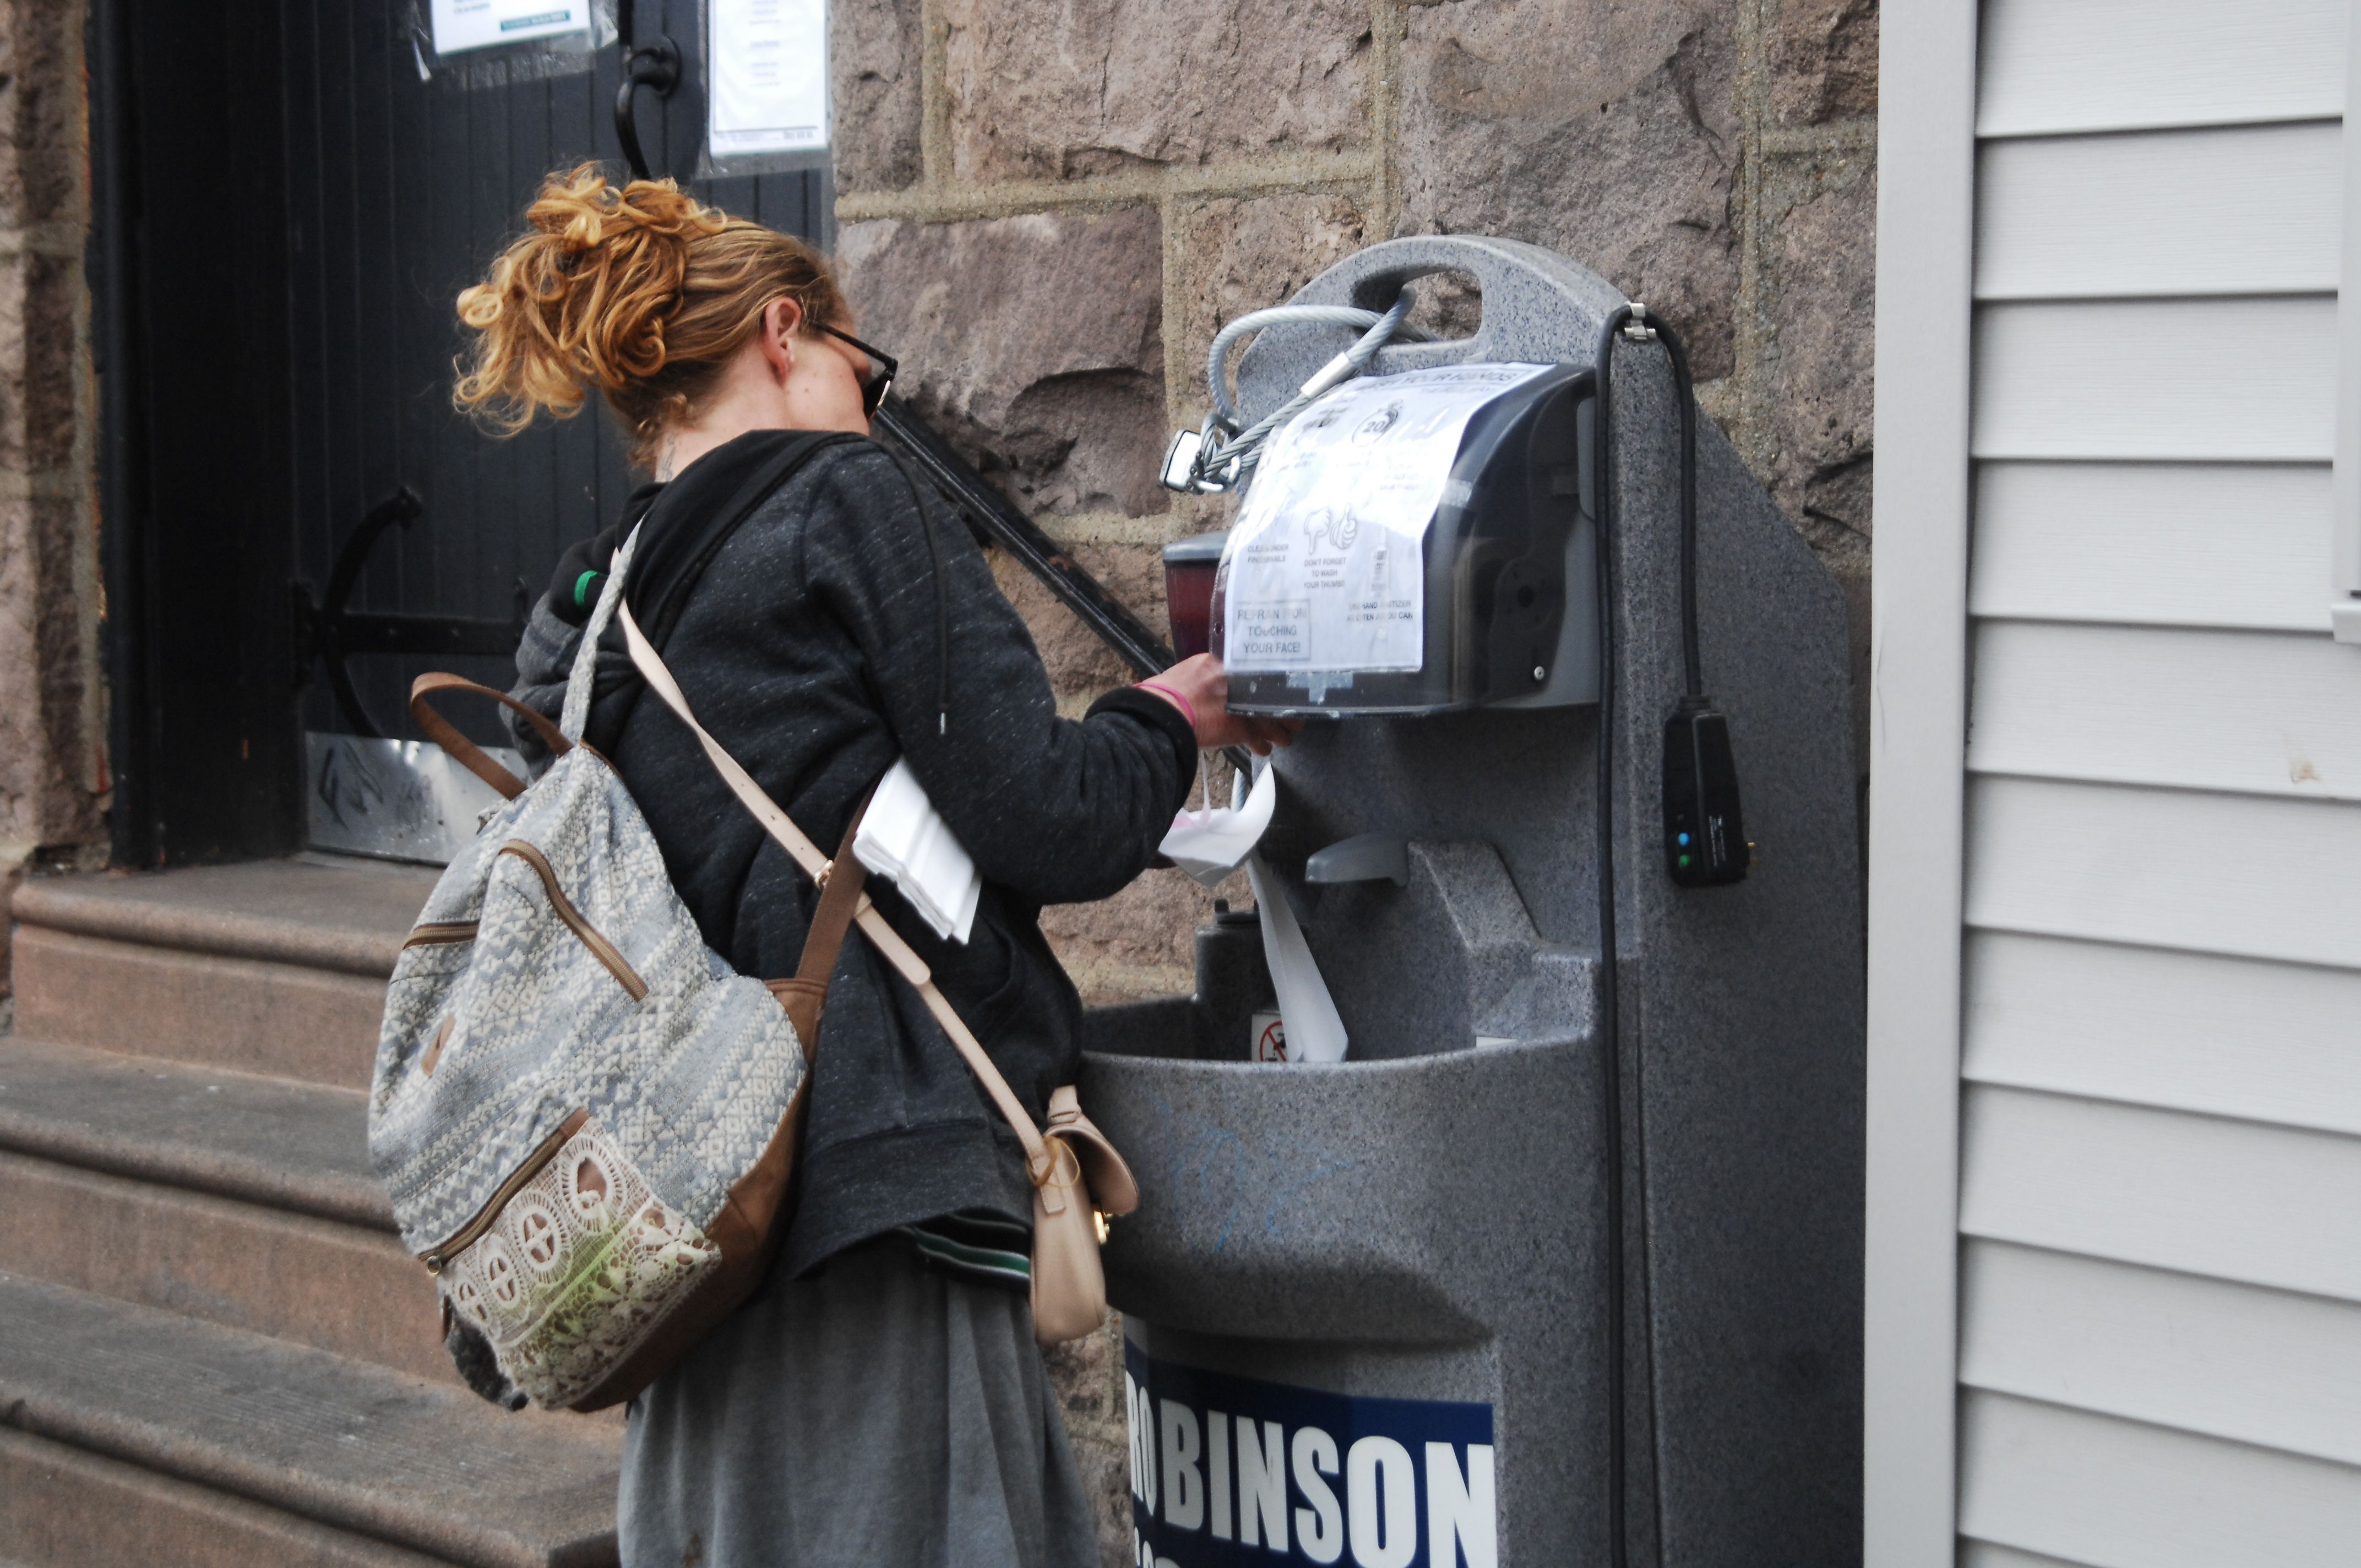 A young homeless woman washes her hands at a sanitation station outside a mission in the Kensington of Philadelphia, PA